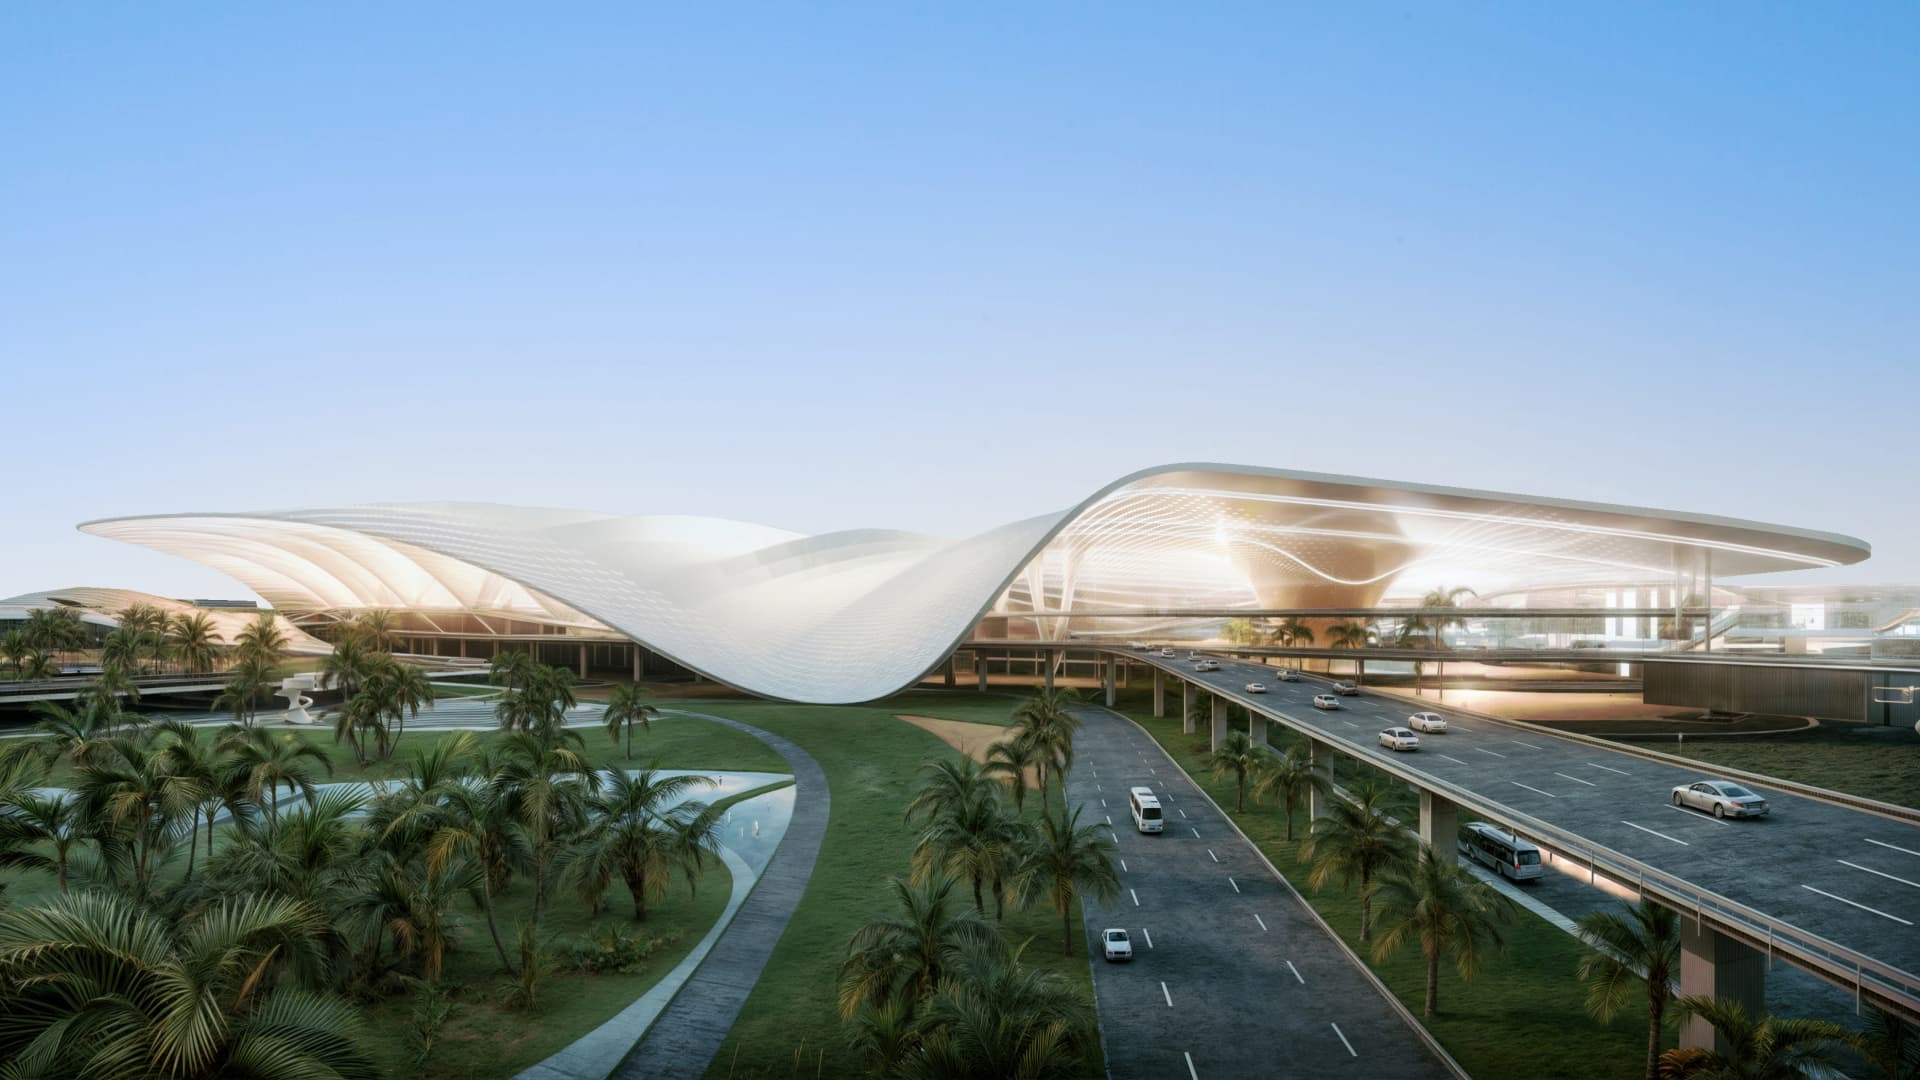 Dubai’s new airport will be five times the size of its current one [Video]